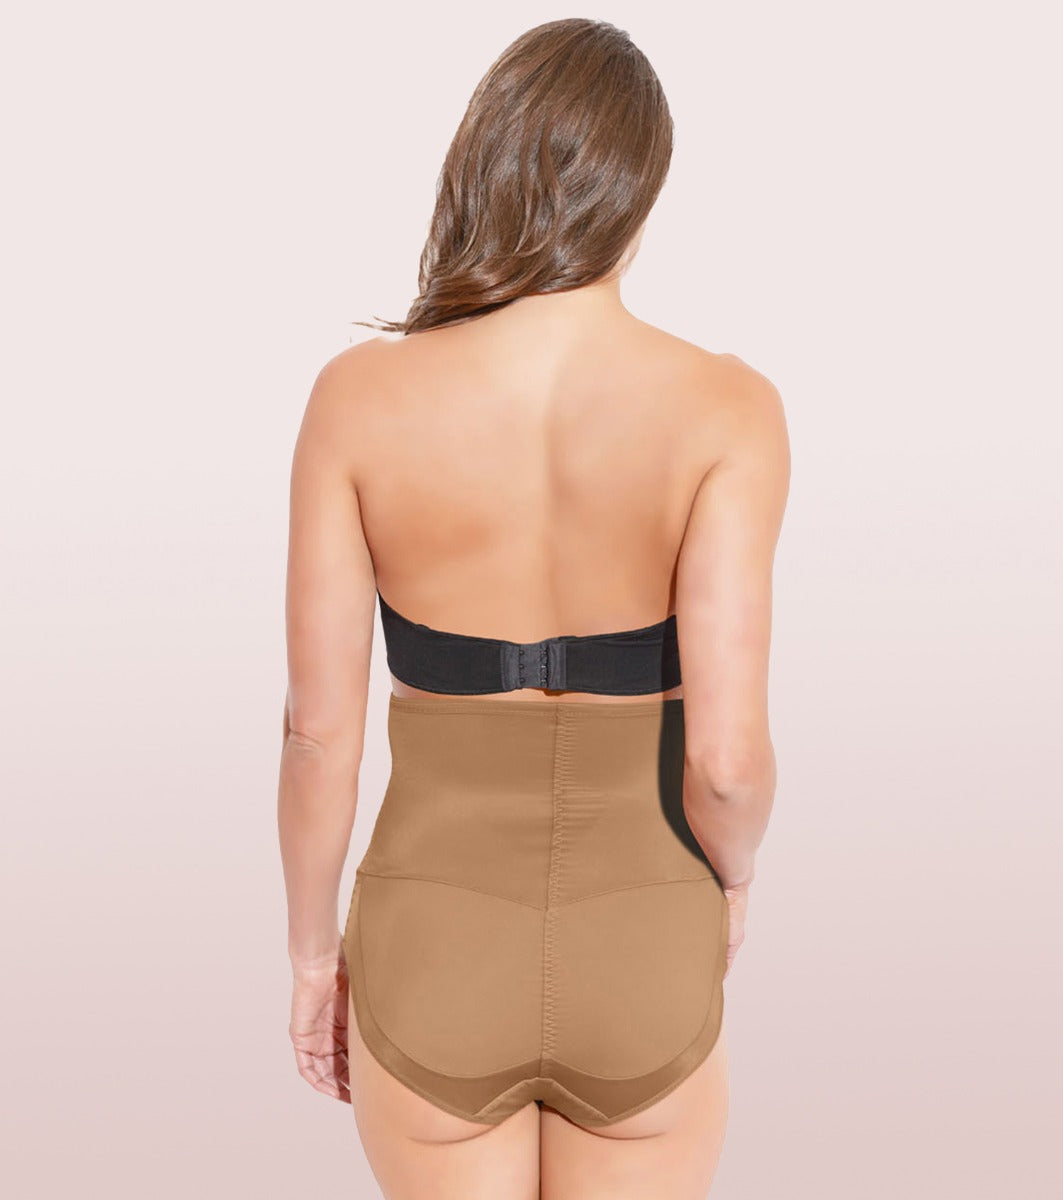 Enamor Hi Waist Lace Slimmer Price Starting From Rs 1,669. Find